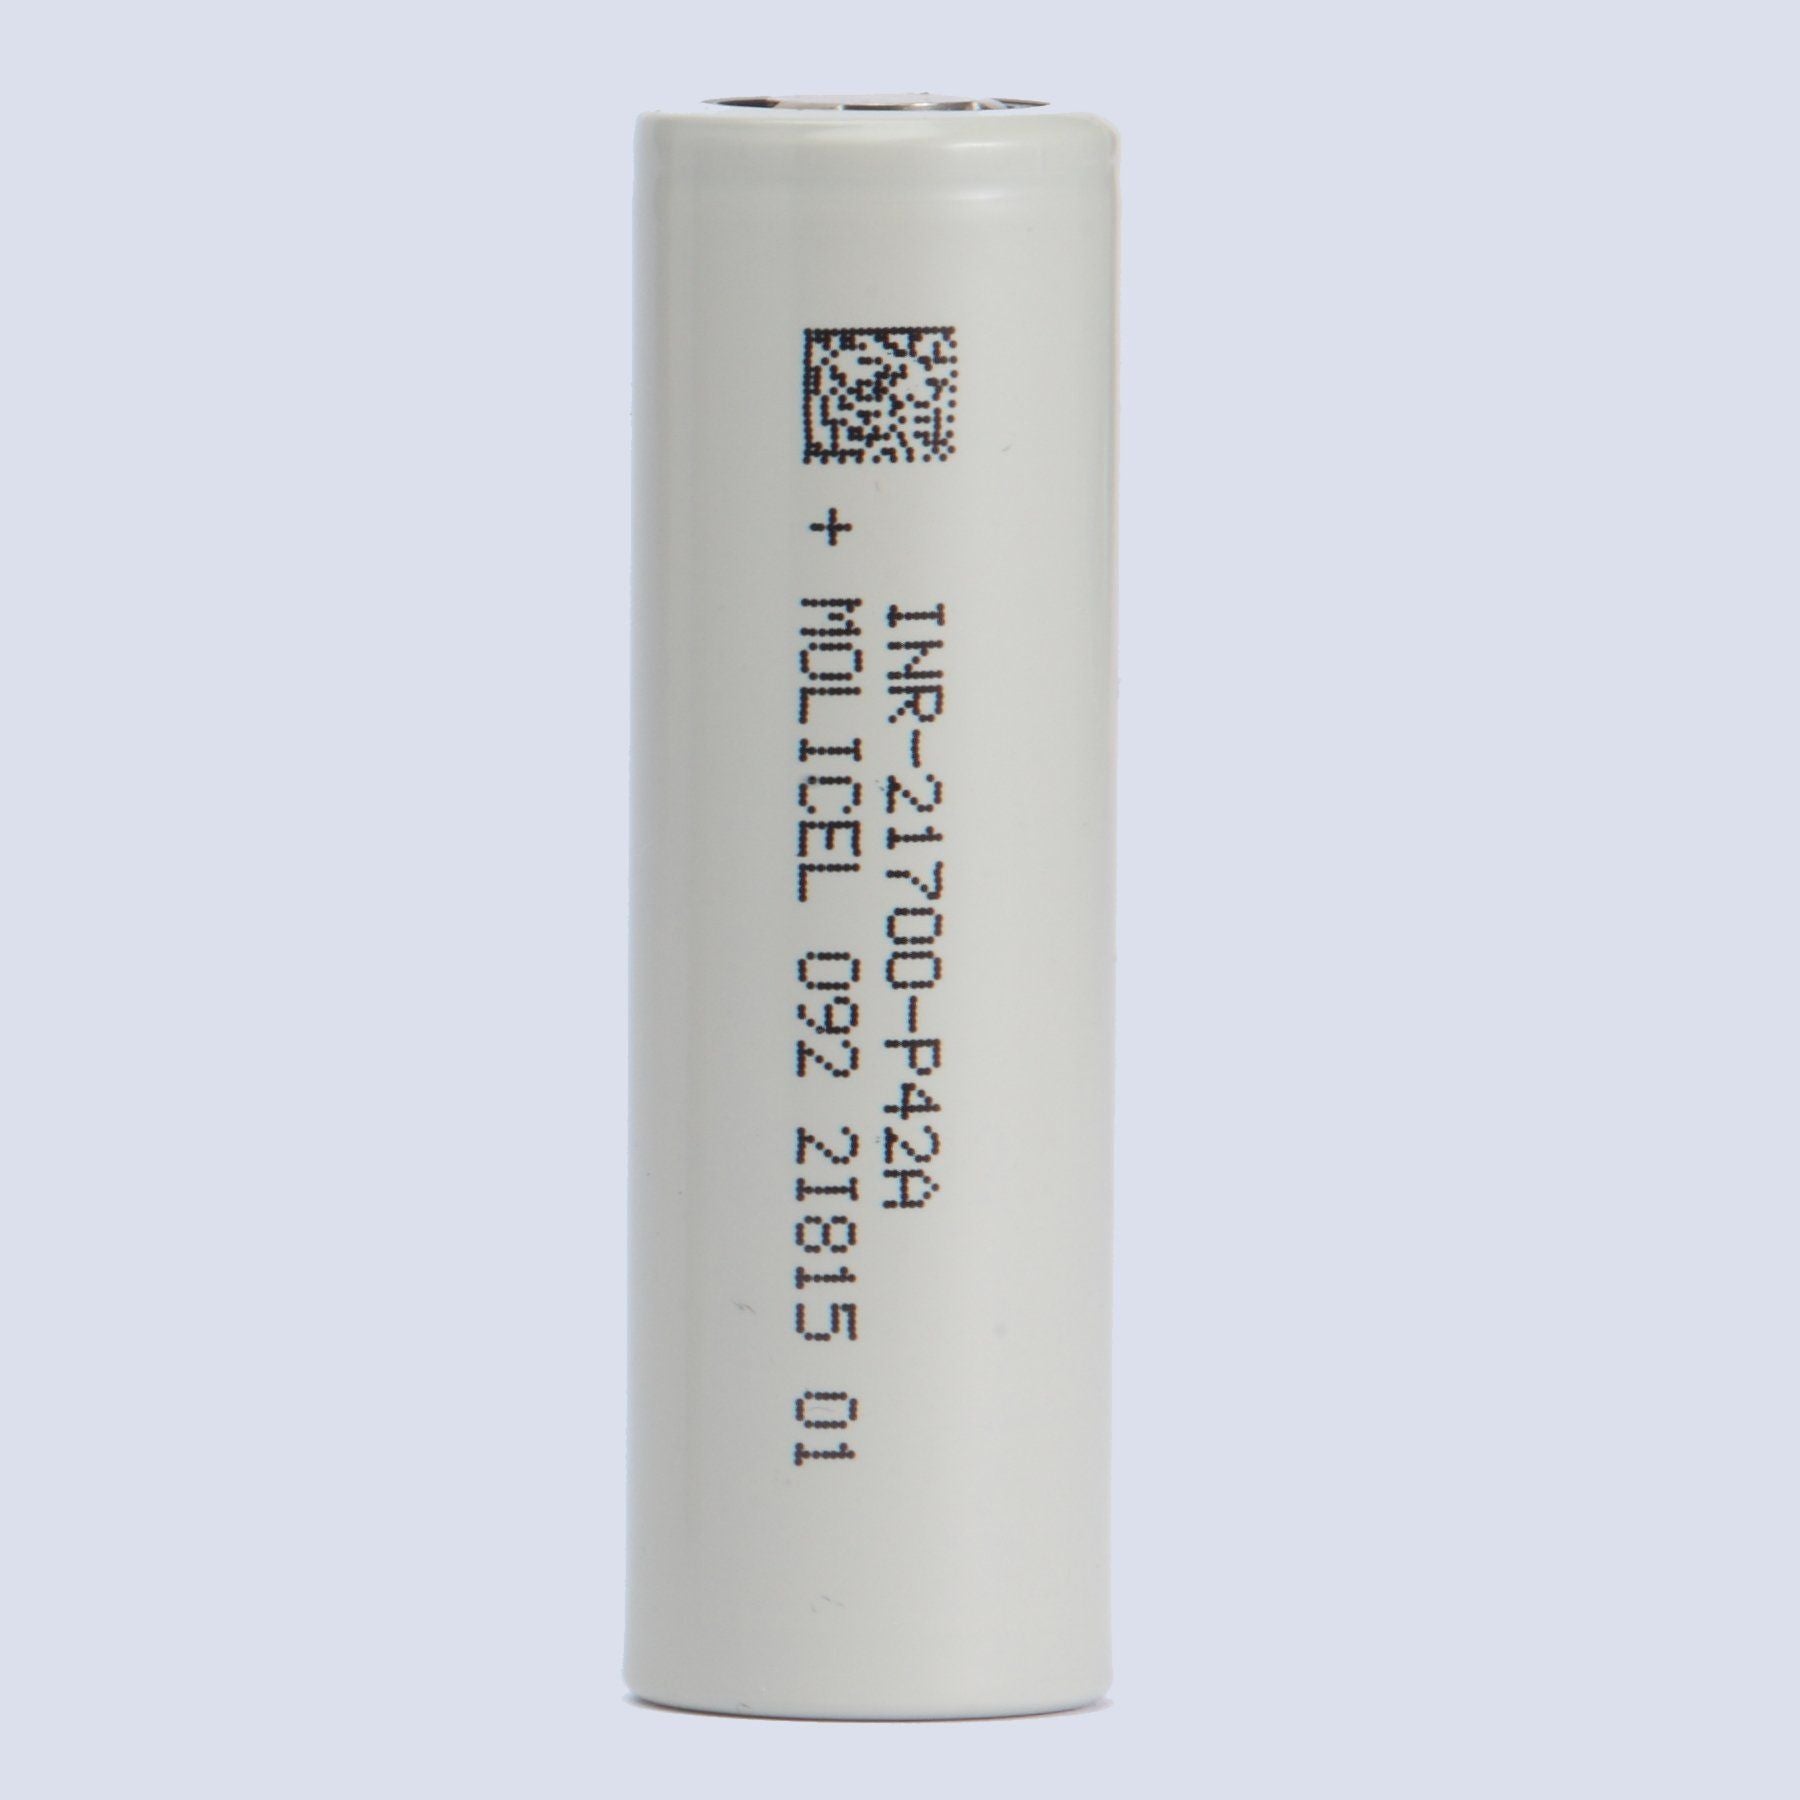 Molicel P42A 21700 Battery - Vapoureyes